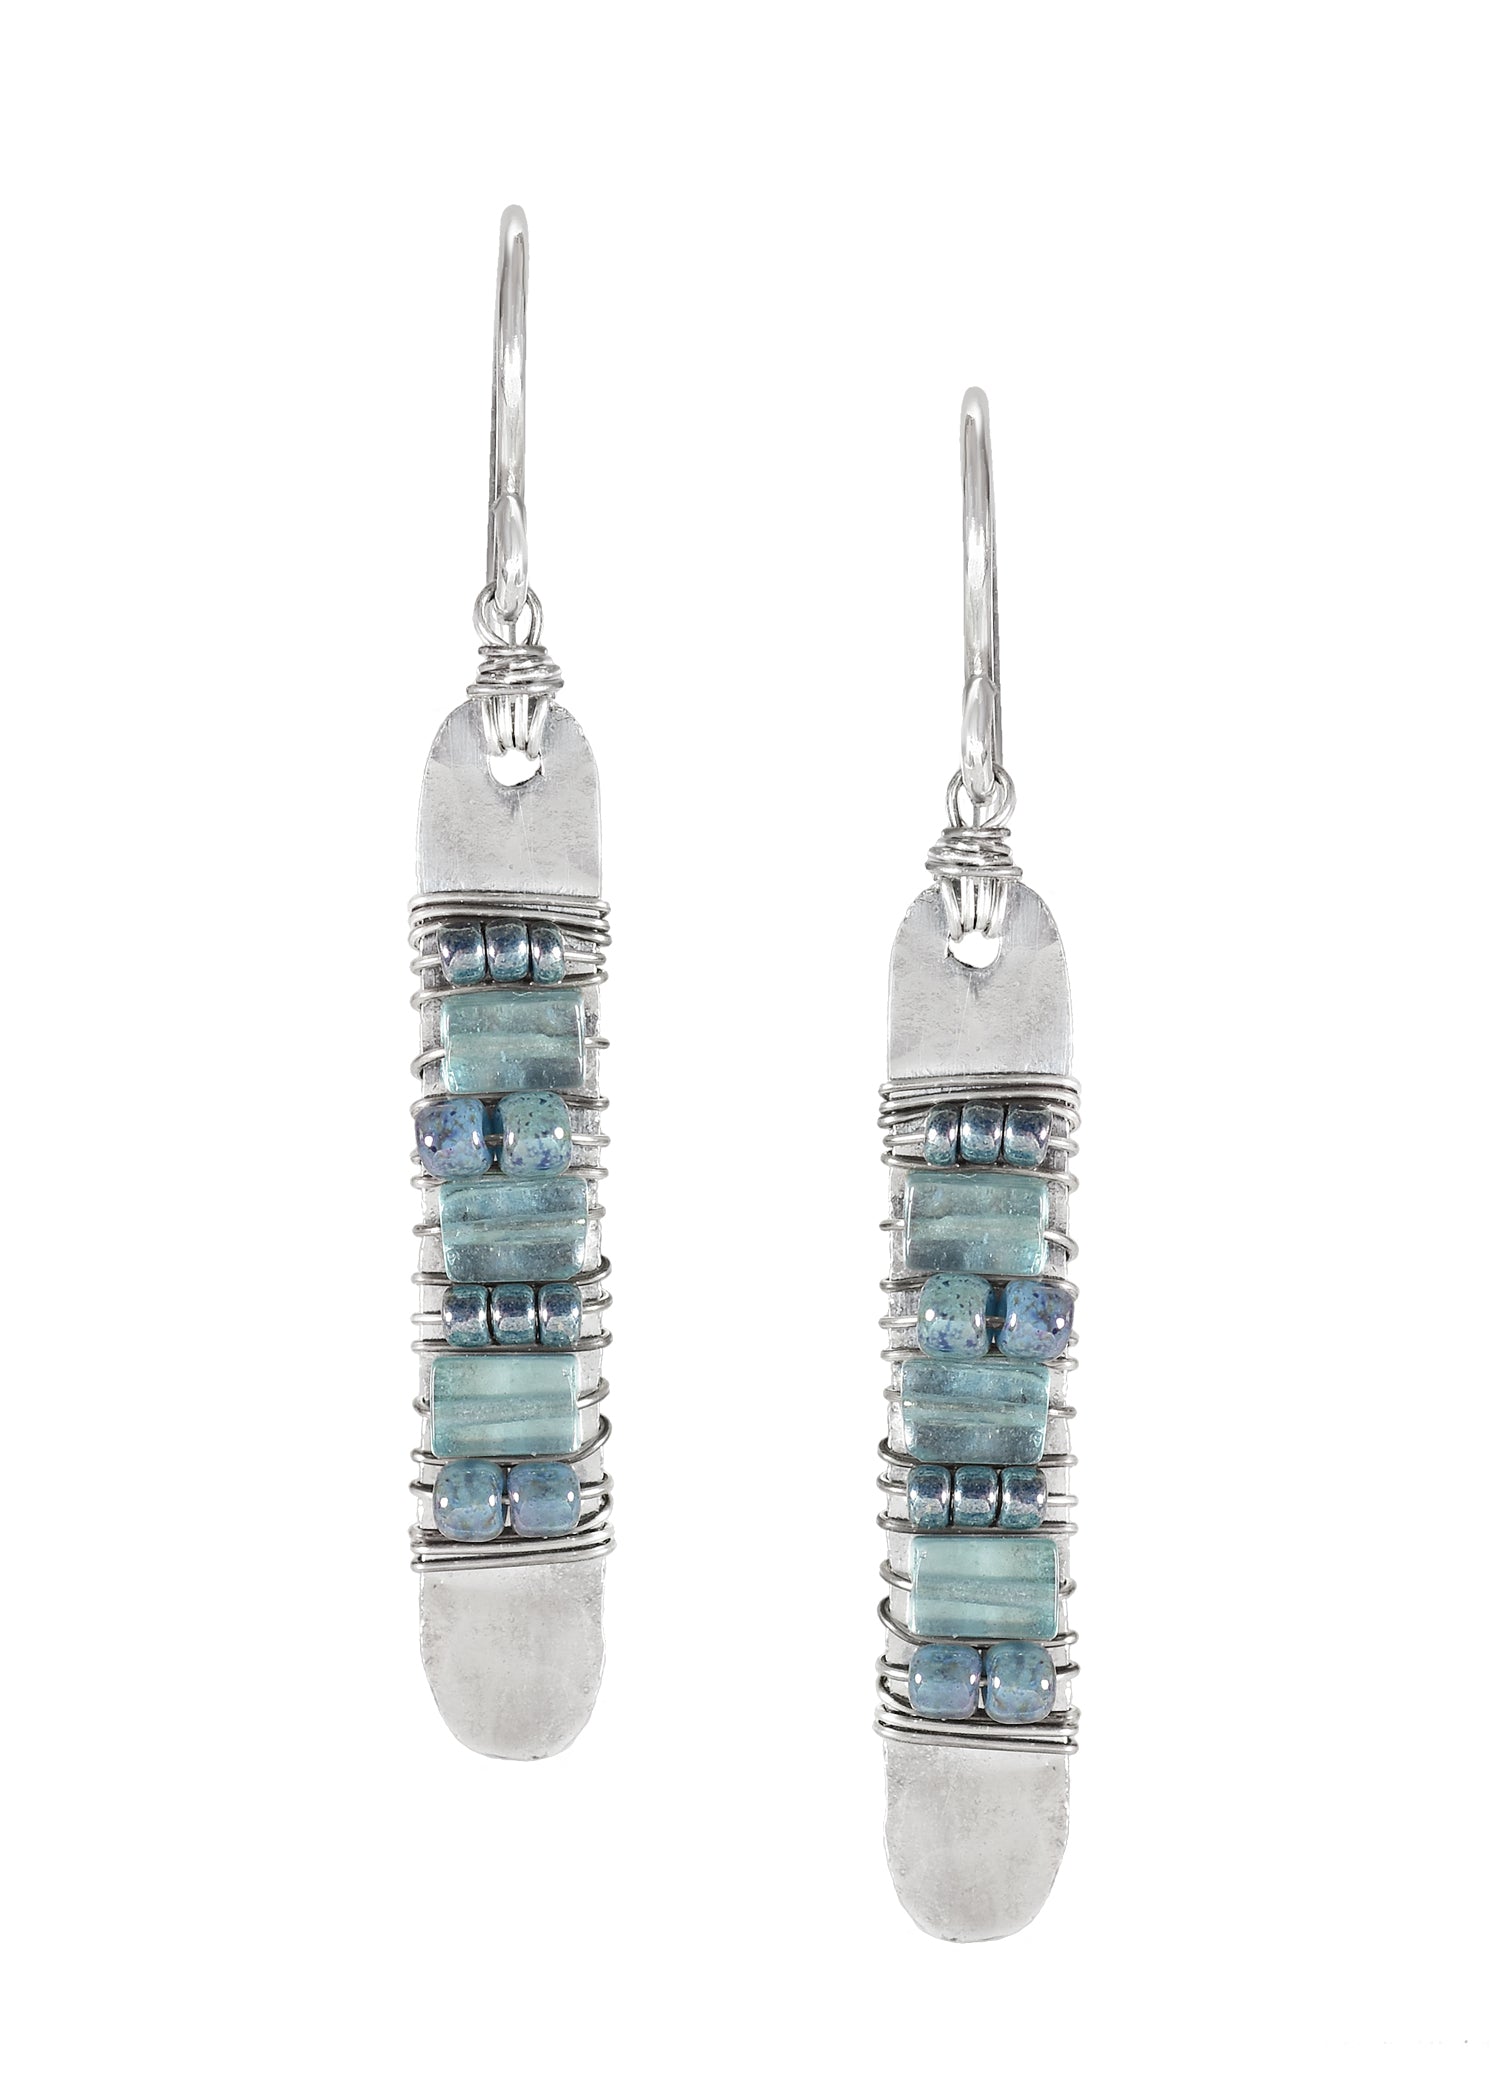 Apatite Seed beads Sterling silver Earrings measure 1-1/2" in length (including the ear wires) and 3/16" in width Handmade in our Los Angeles studio